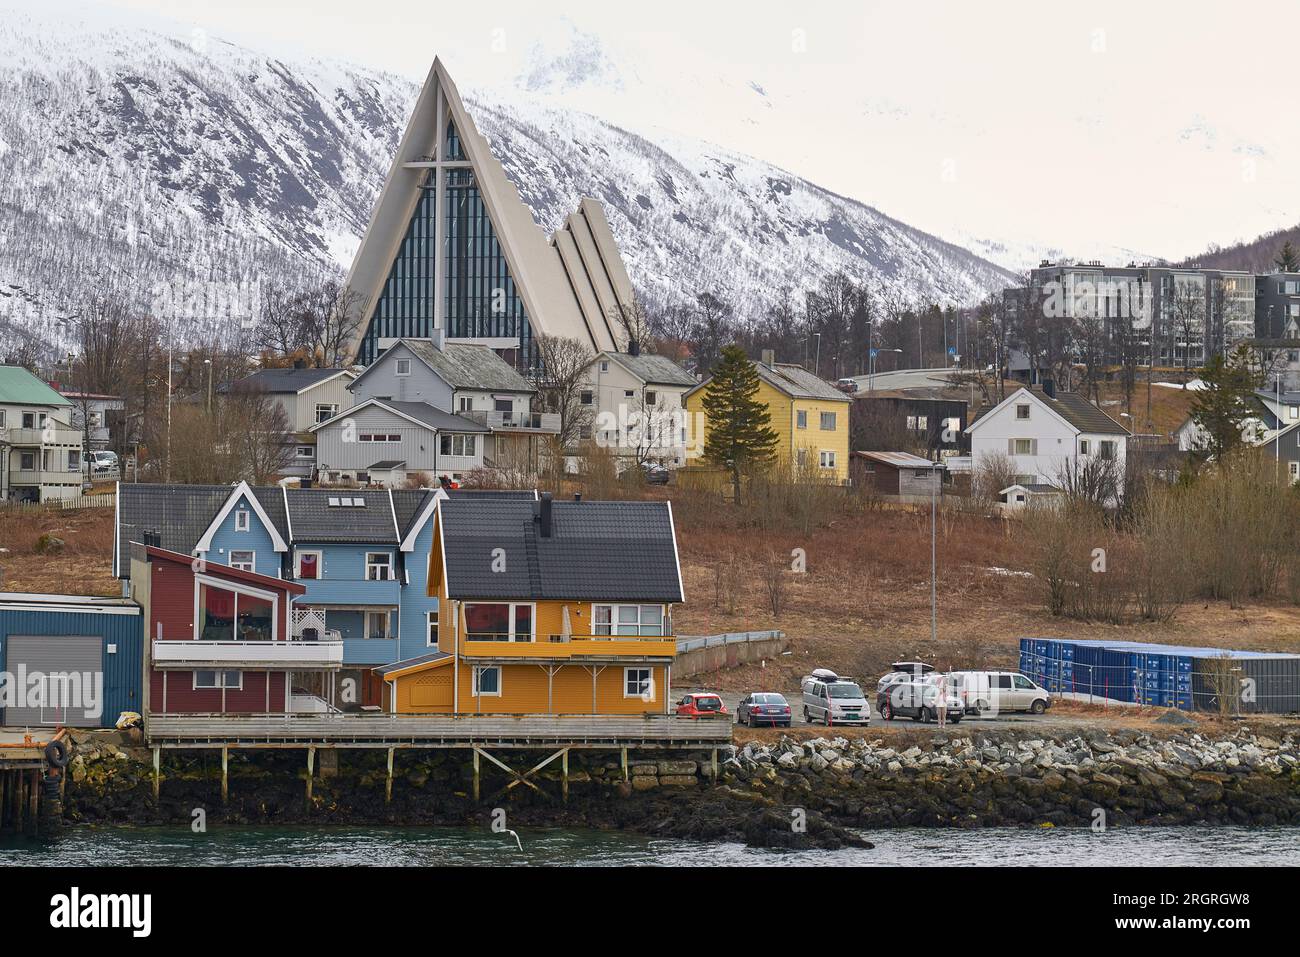 The Arctic Cathedral (Tromsdalen Kirke, Ishavskatedralen), Or 'The Cathedral of the Arctic Ocean' Located On The Shores Of The Tromsøysundet Strait. Stock Photo